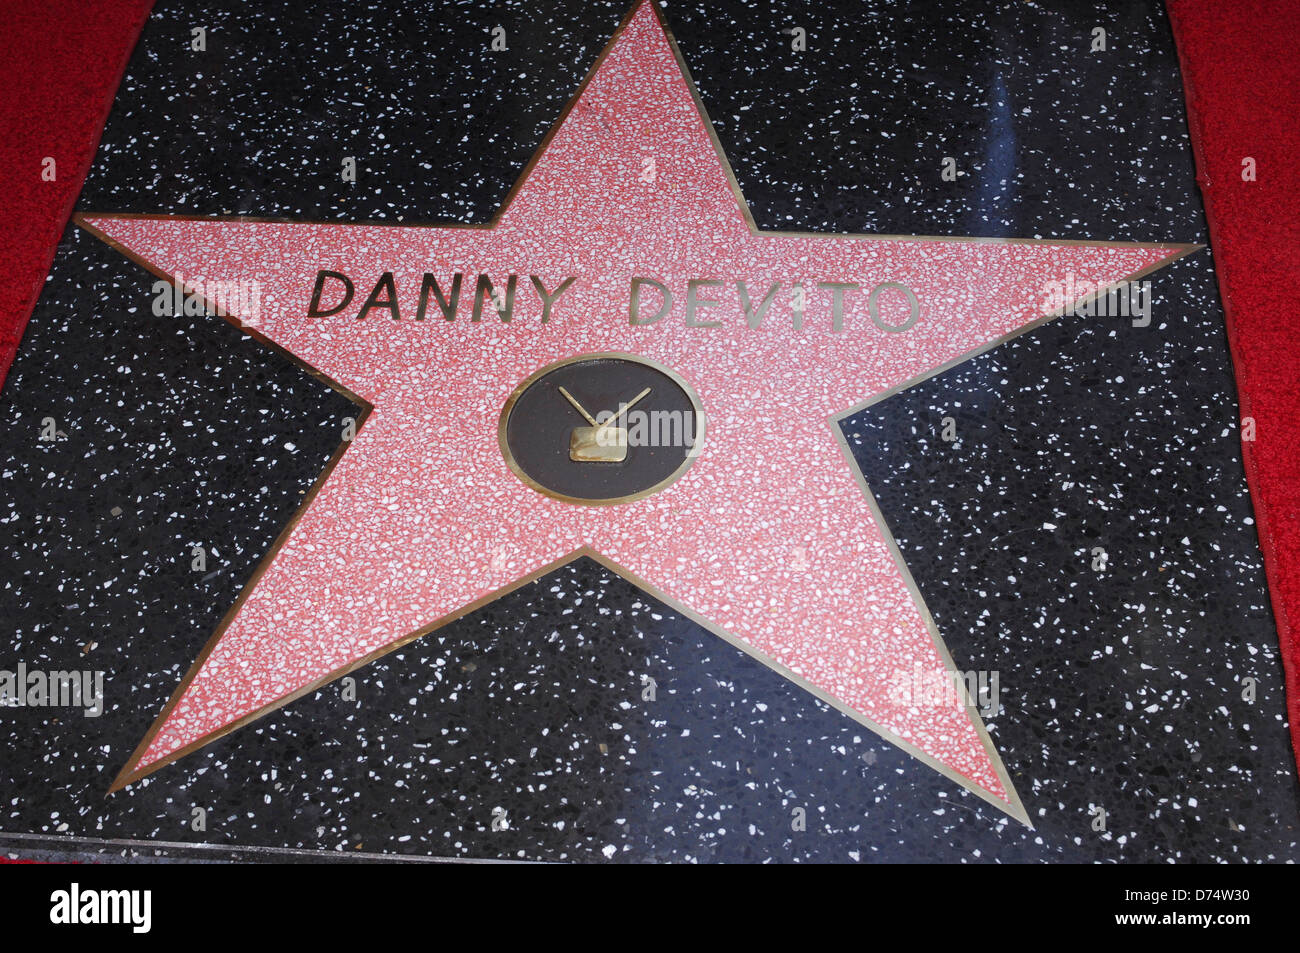 Atmosphere Danny DeVito is honoured with a star on the Hollywood Walk of Fame, held on Hollywood Boulevard Los Angeles, Stock Photo